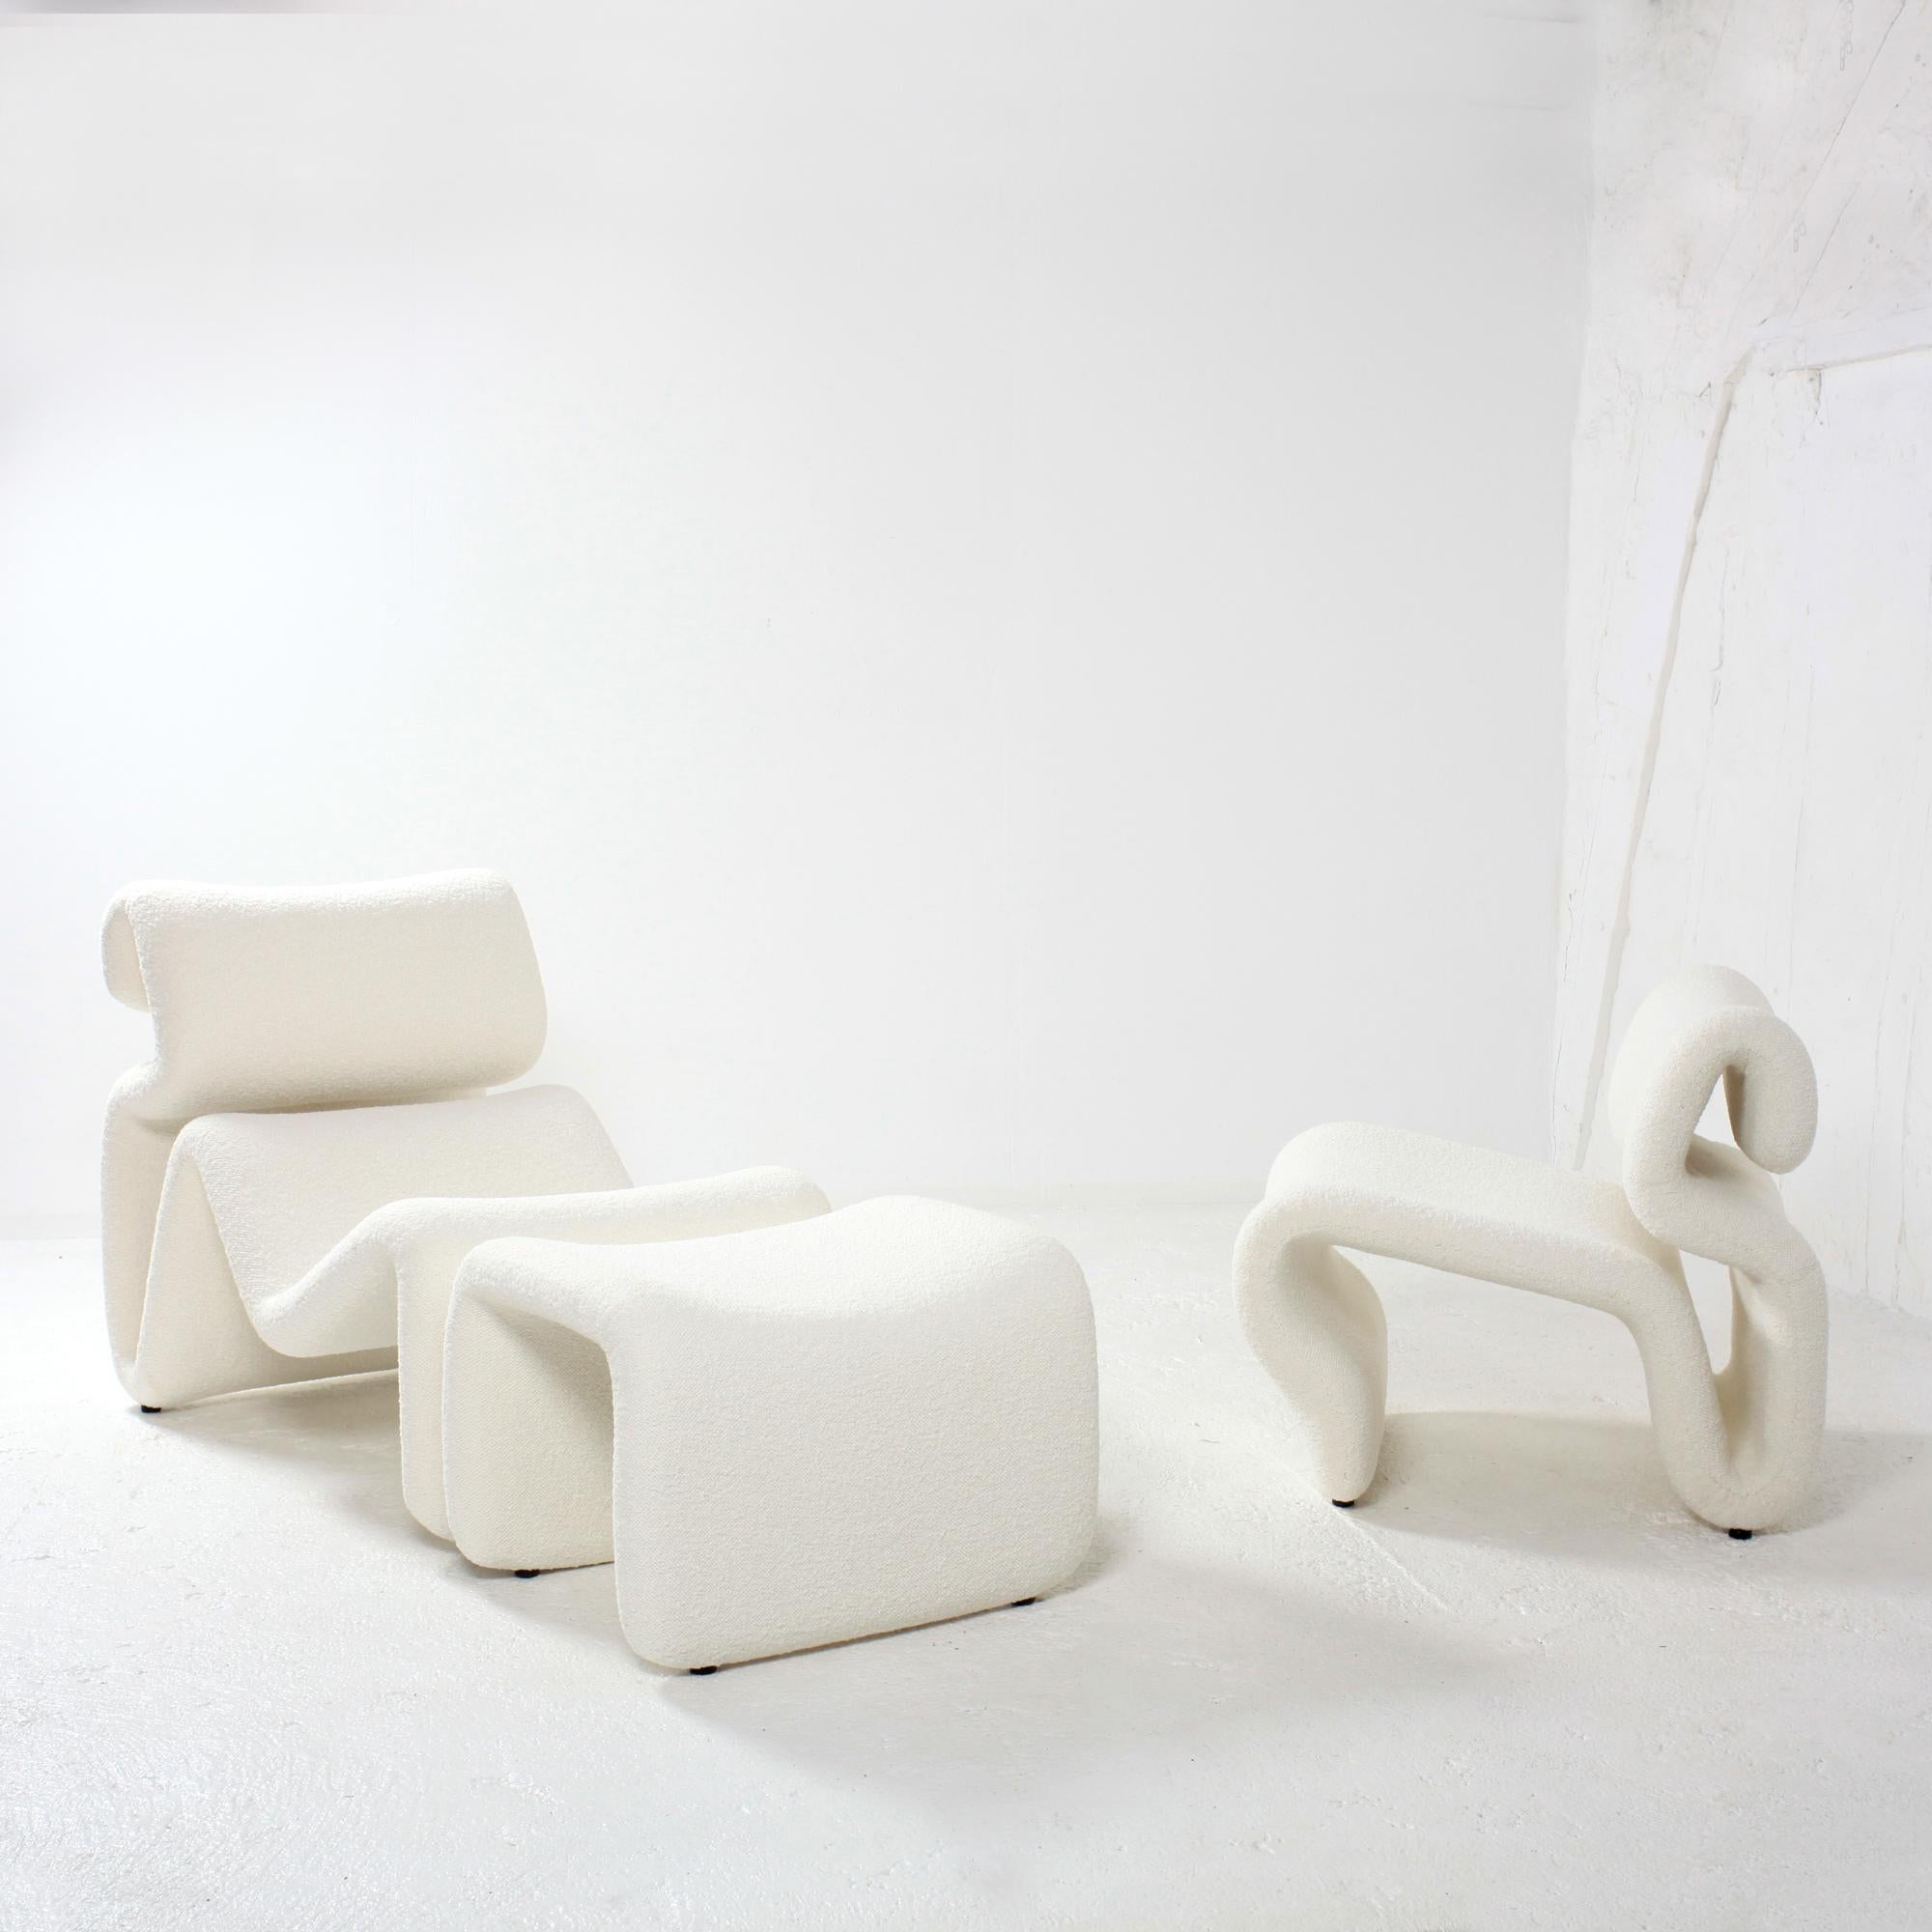 Etcetera Lounge Chair With Footstool by Jan Ekselius for JOC Sweden 1970s 11